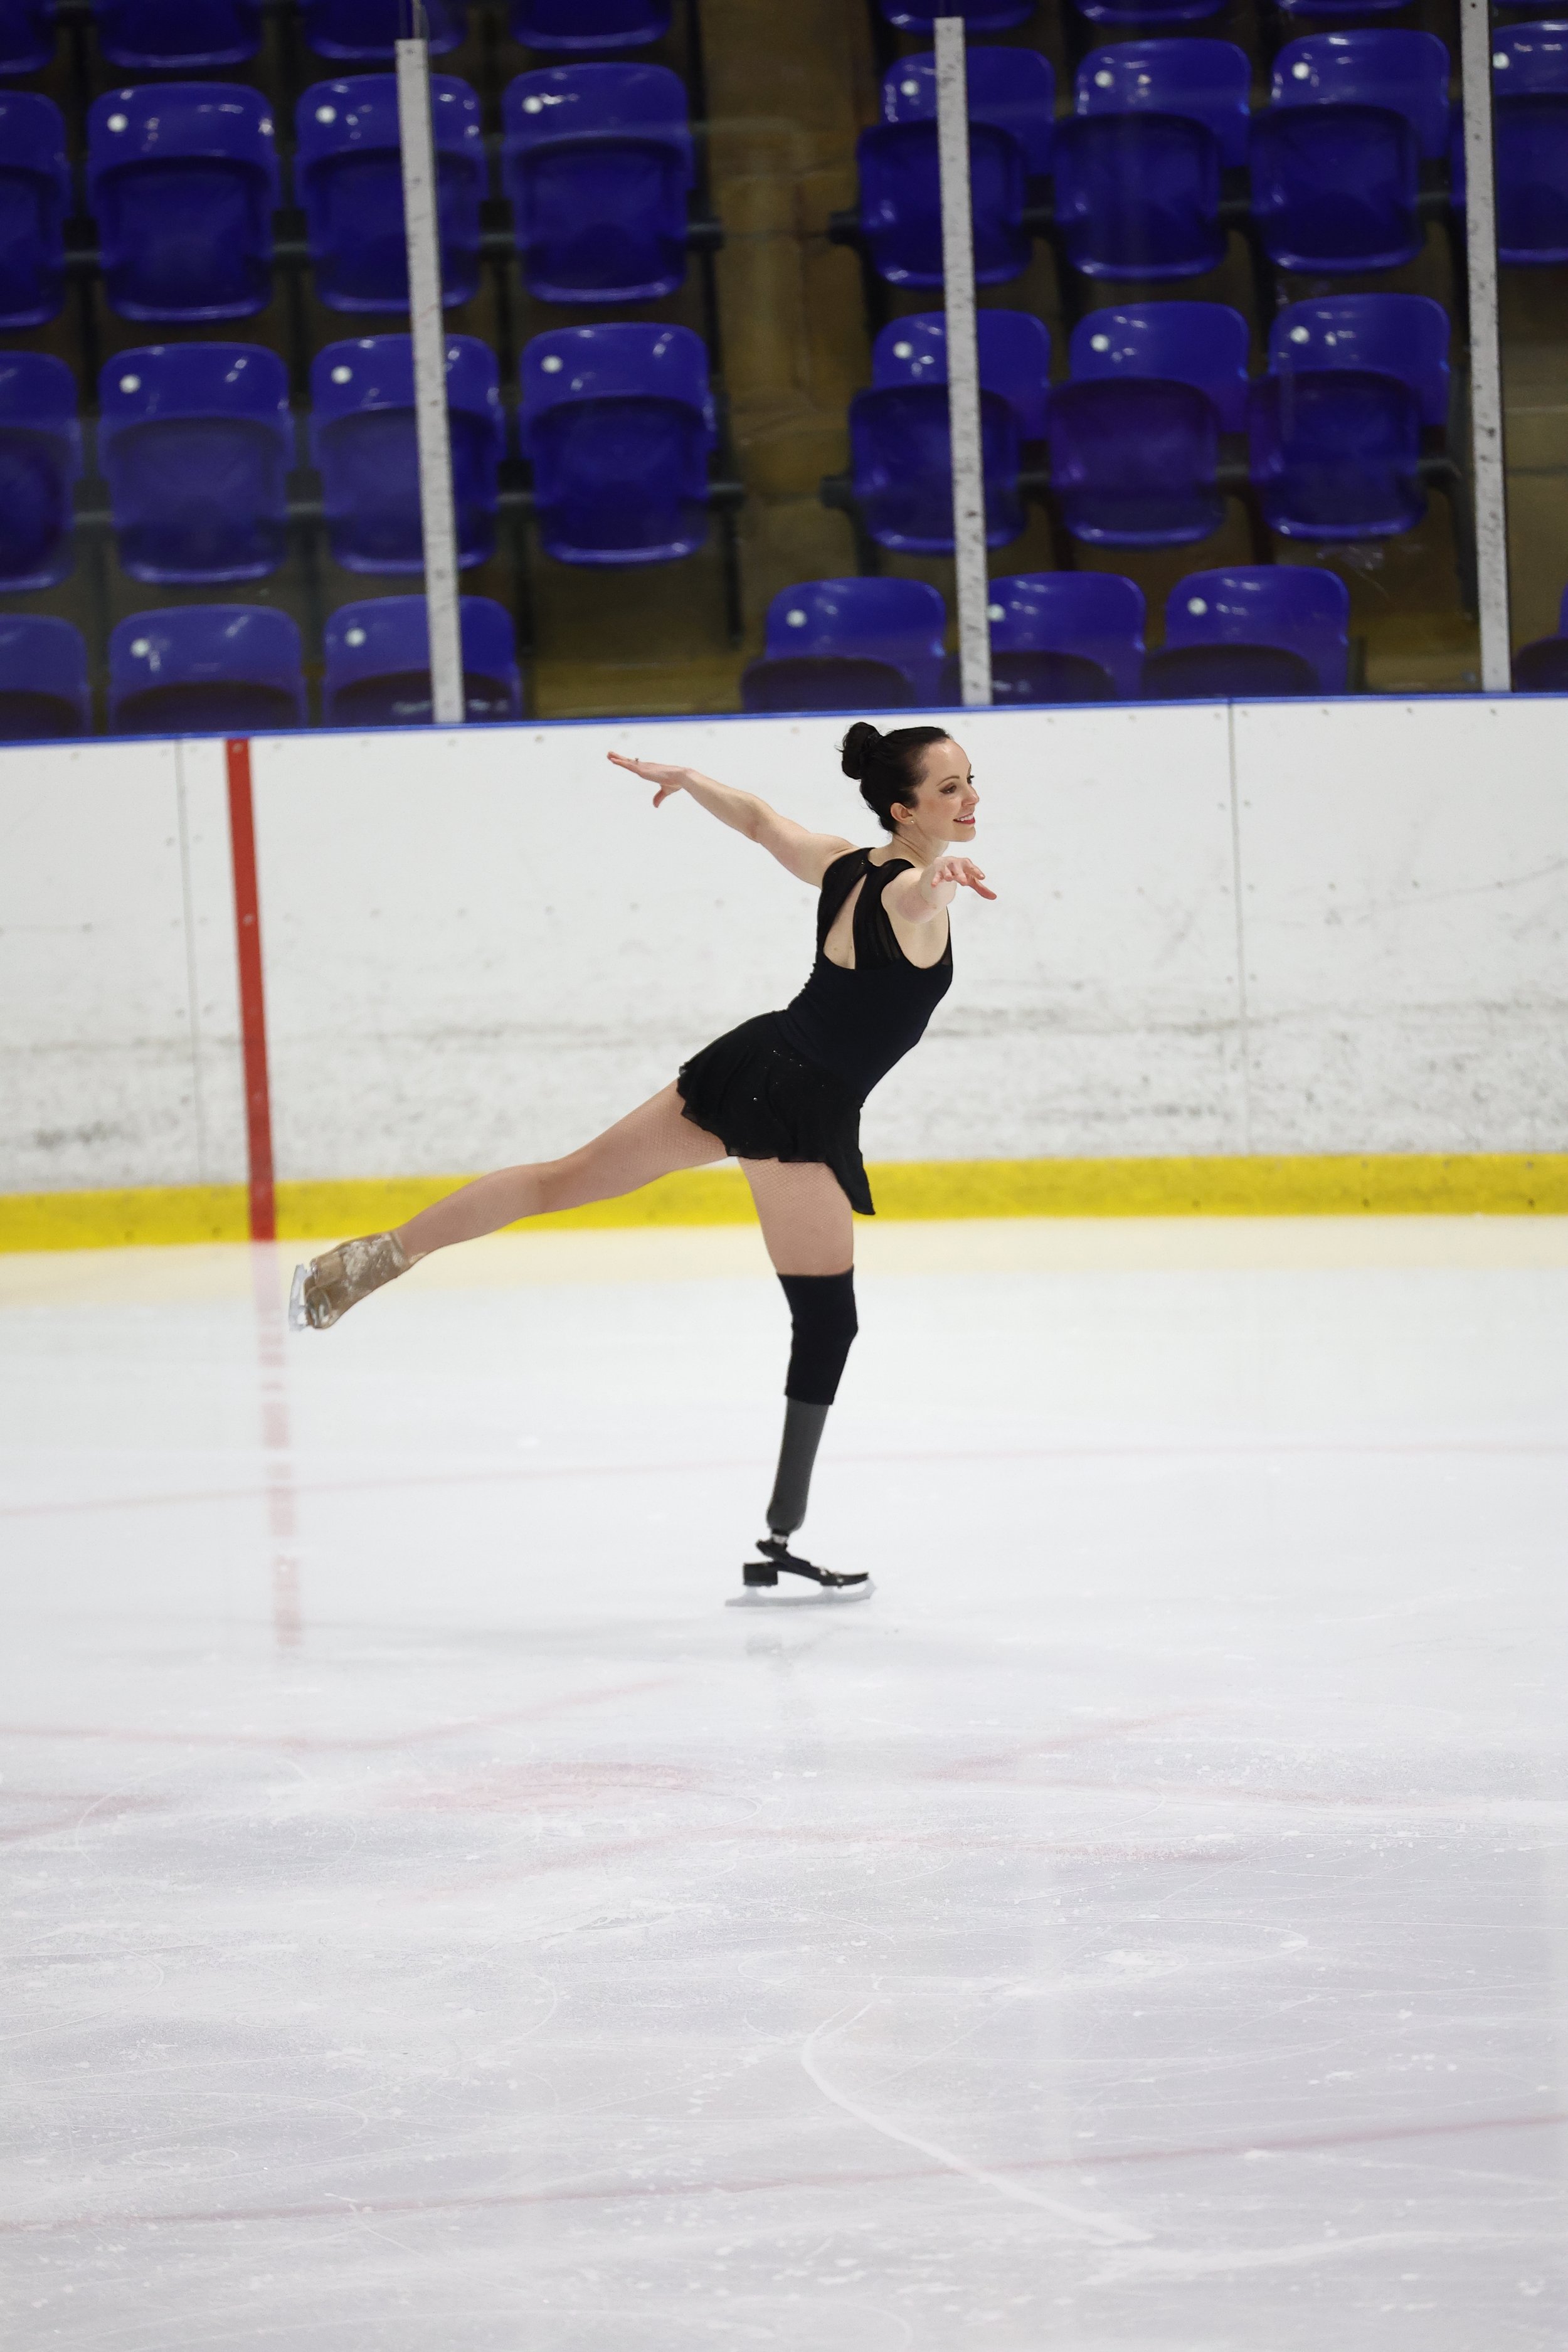 British Paralympian Stef Reid competing at the British Adult Figure Skating Nationals